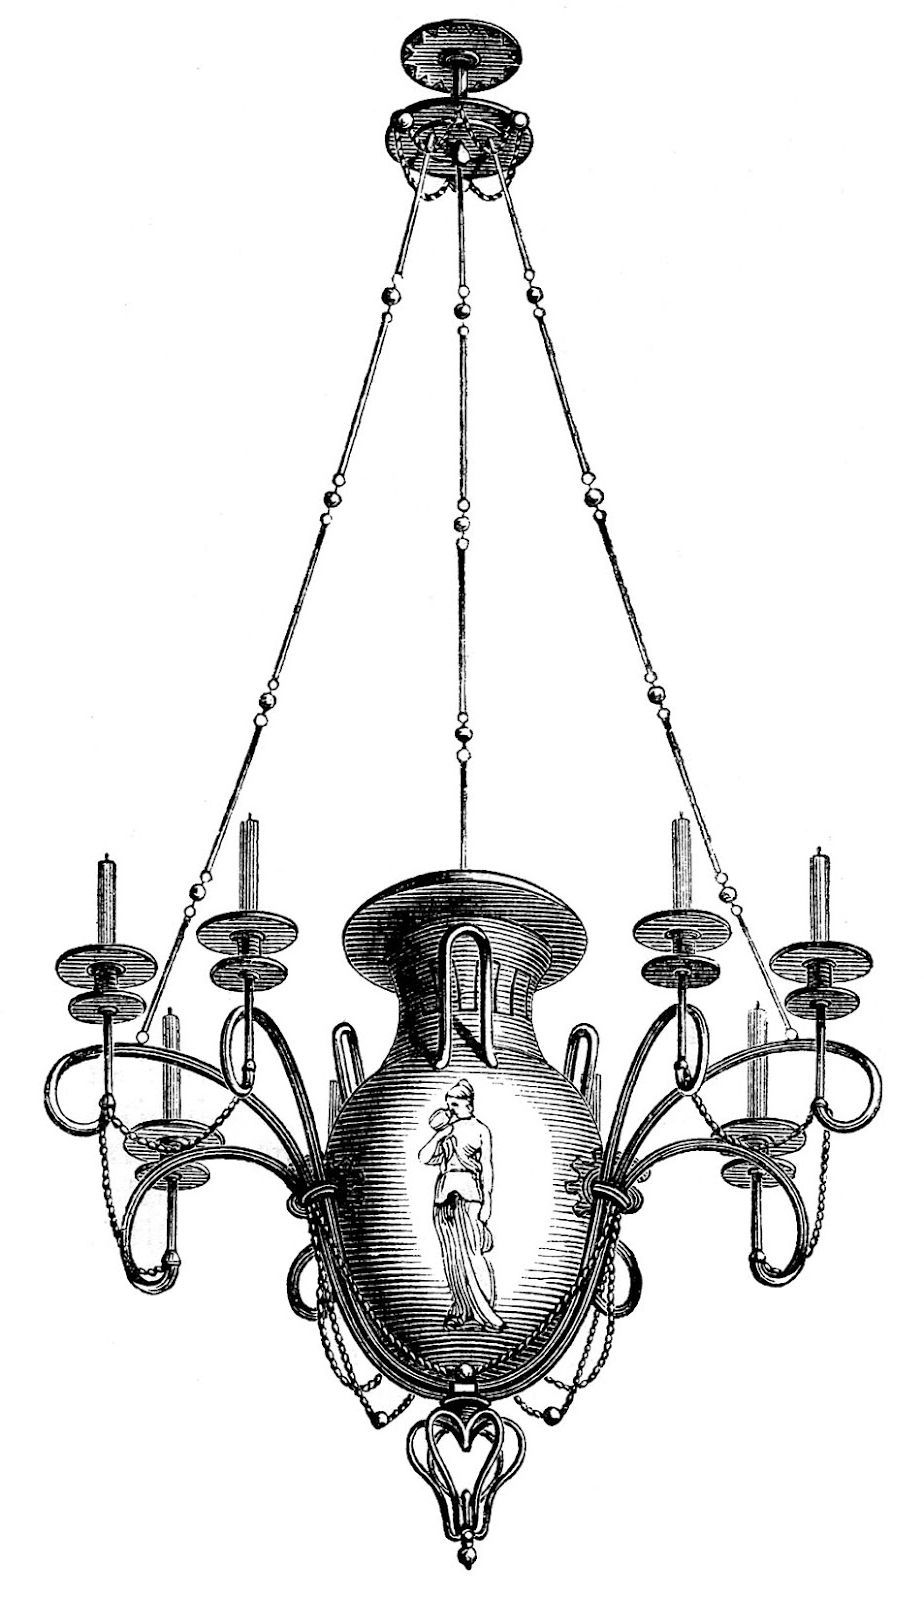 Antique Chandeliers Regarding Most Popular Antique Images – 3 Chandeliers – 1 Spooky – The Graphics Fairy (View 15 of 20)